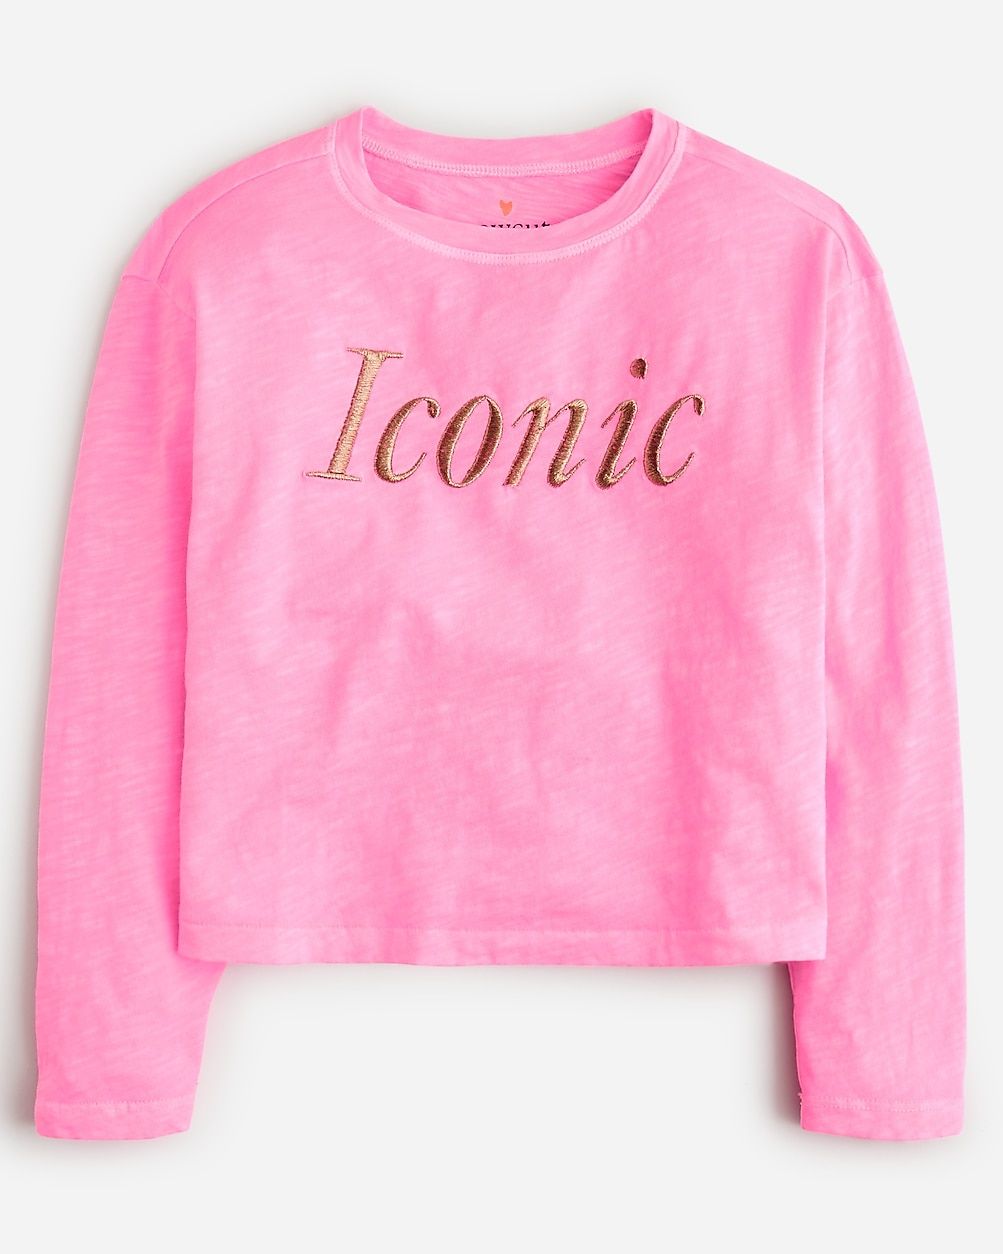 Girls' cropped "iconic" graphic T-shirt with embroidery | J.Crew US